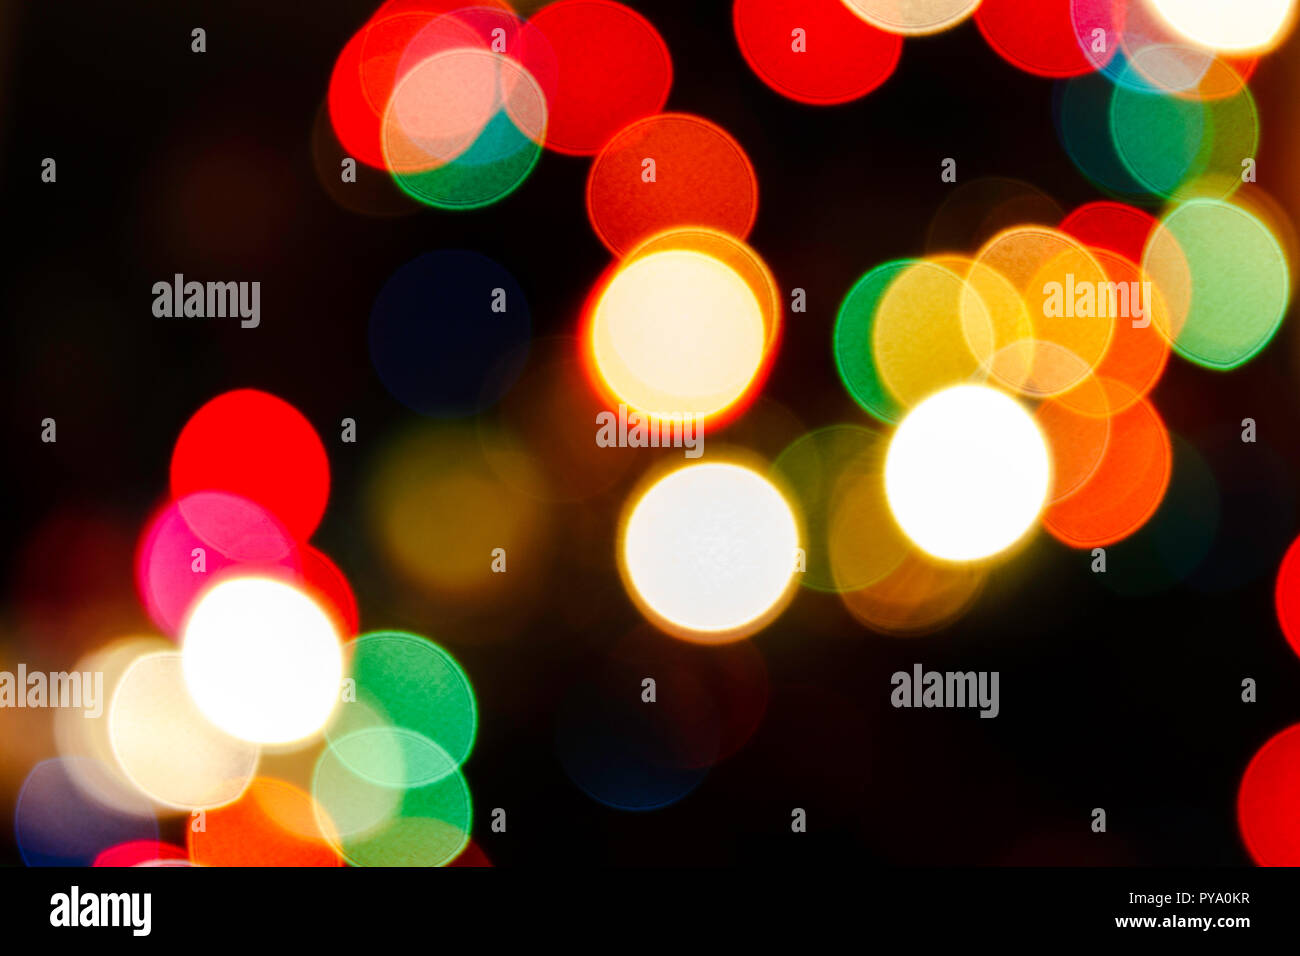 Bokeh of Christmas Lights with red, green, orange, yellow and white lights. Stock Photo